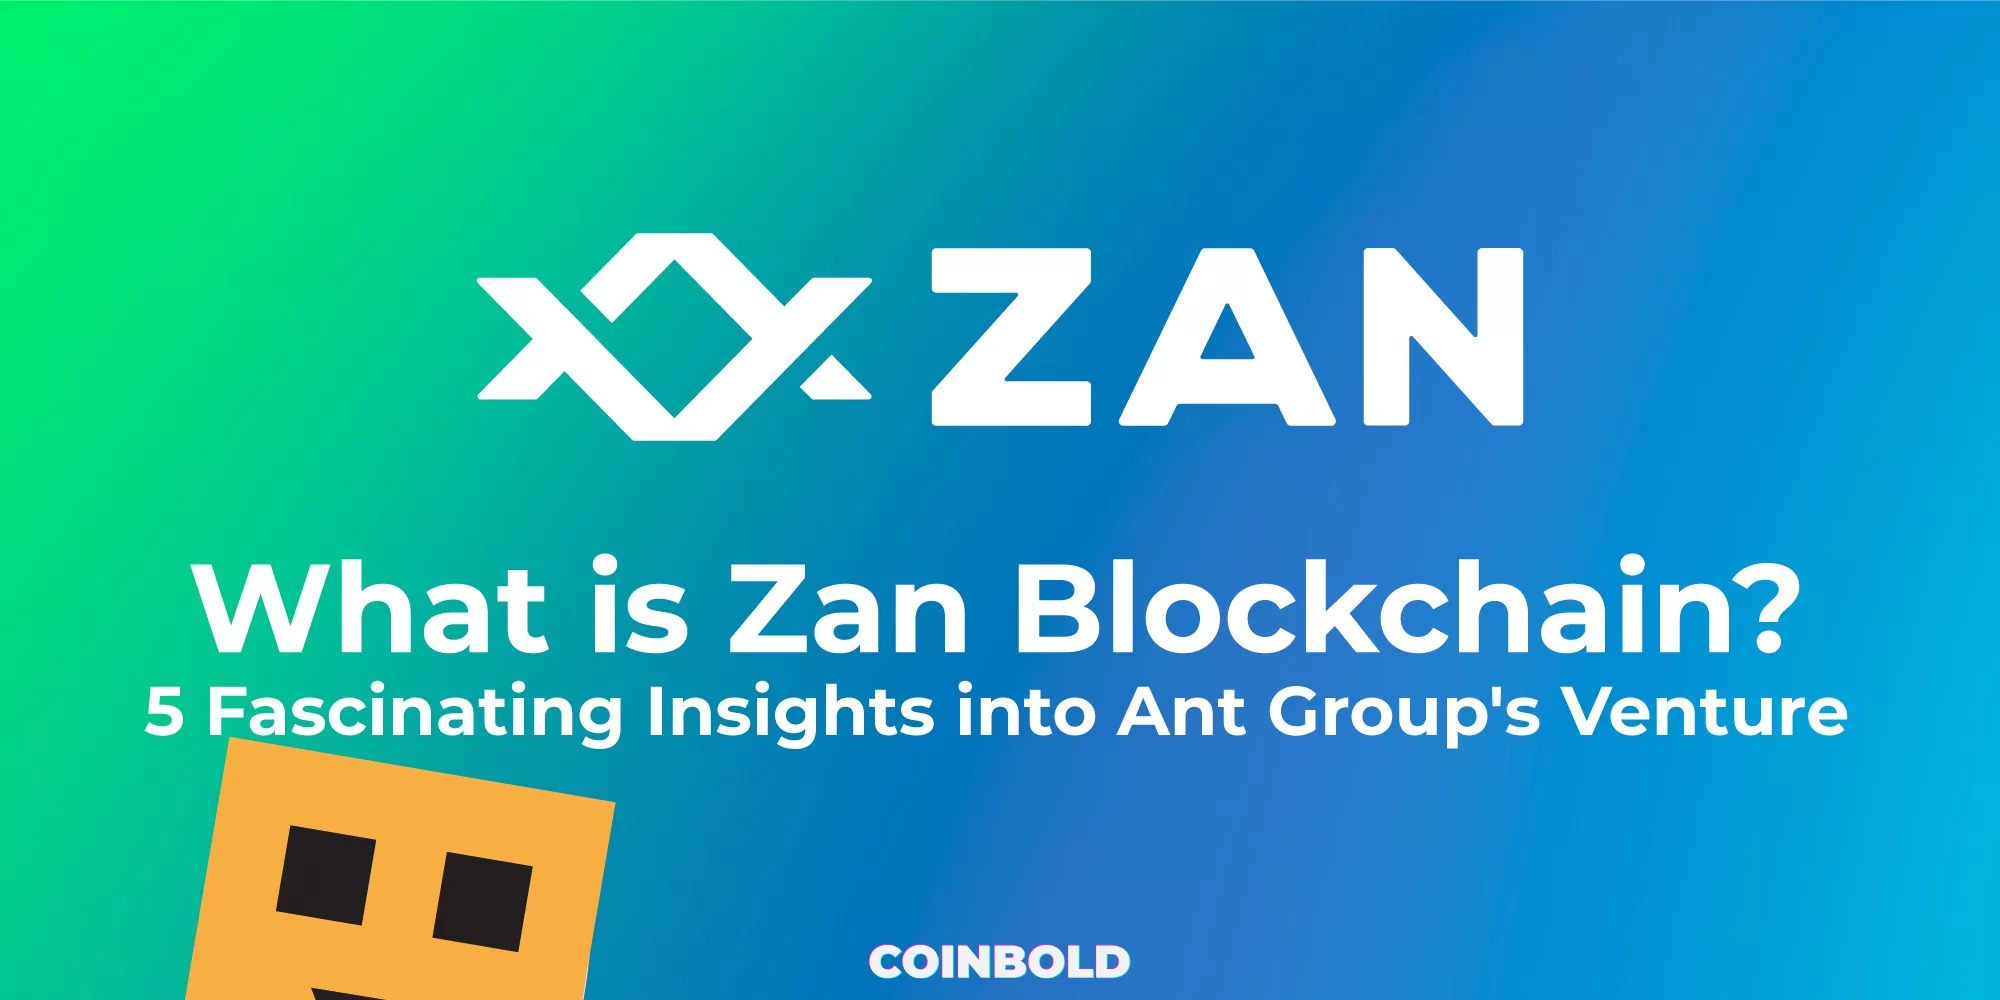 What is Zan Blockchain? 5 Fascinating Insights into Ant Group's Venture